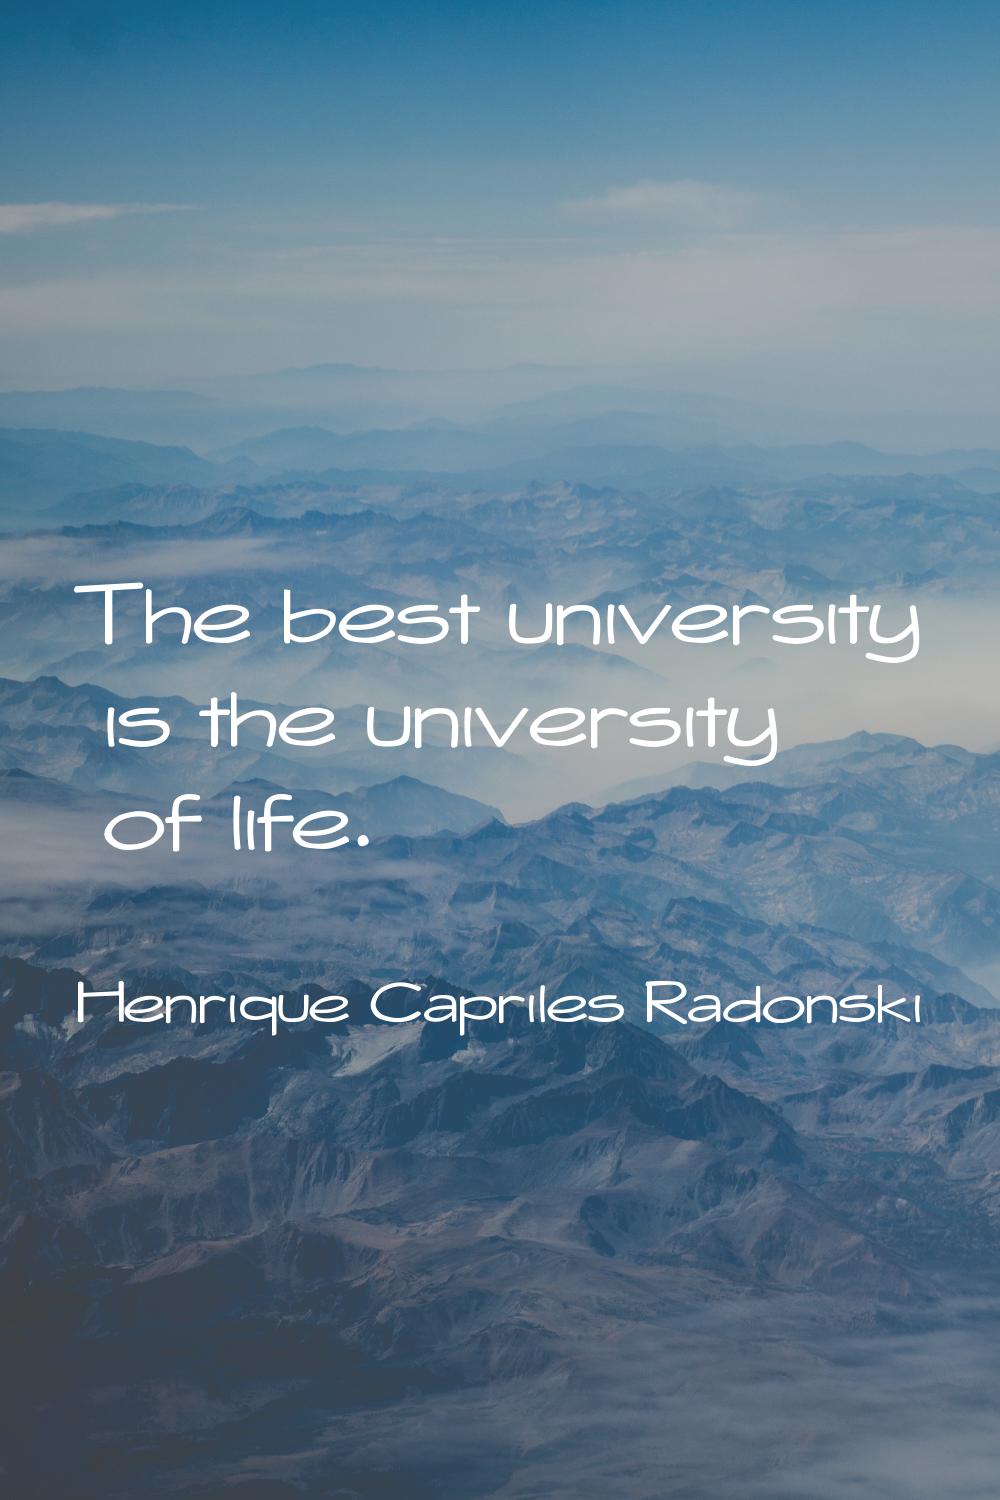 The best university is the university of life.